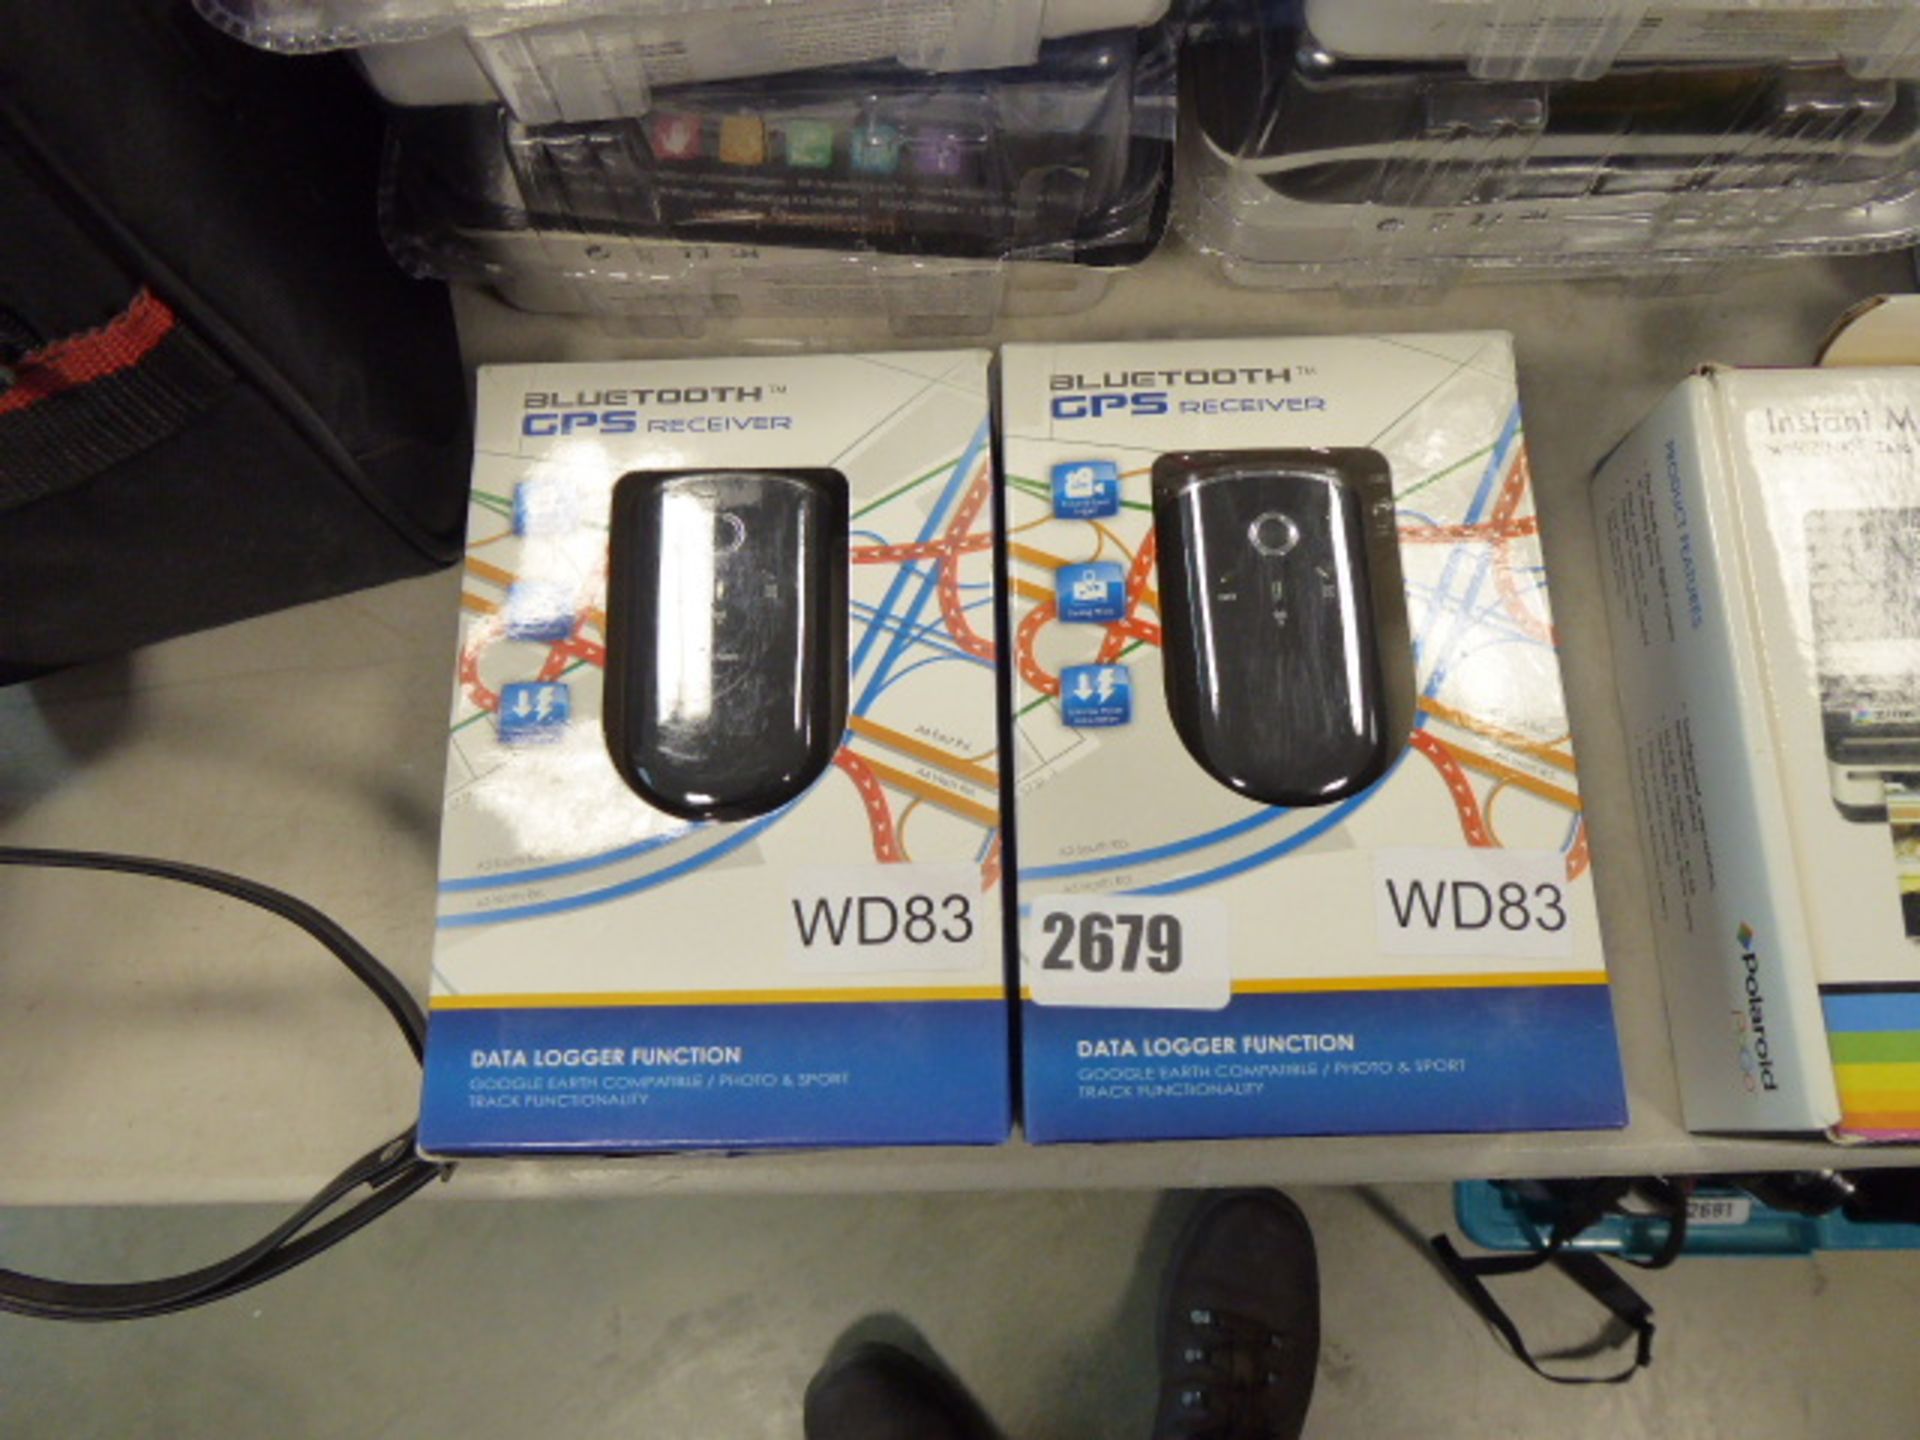 Bluetooth GPS receivers data loggers in boxes